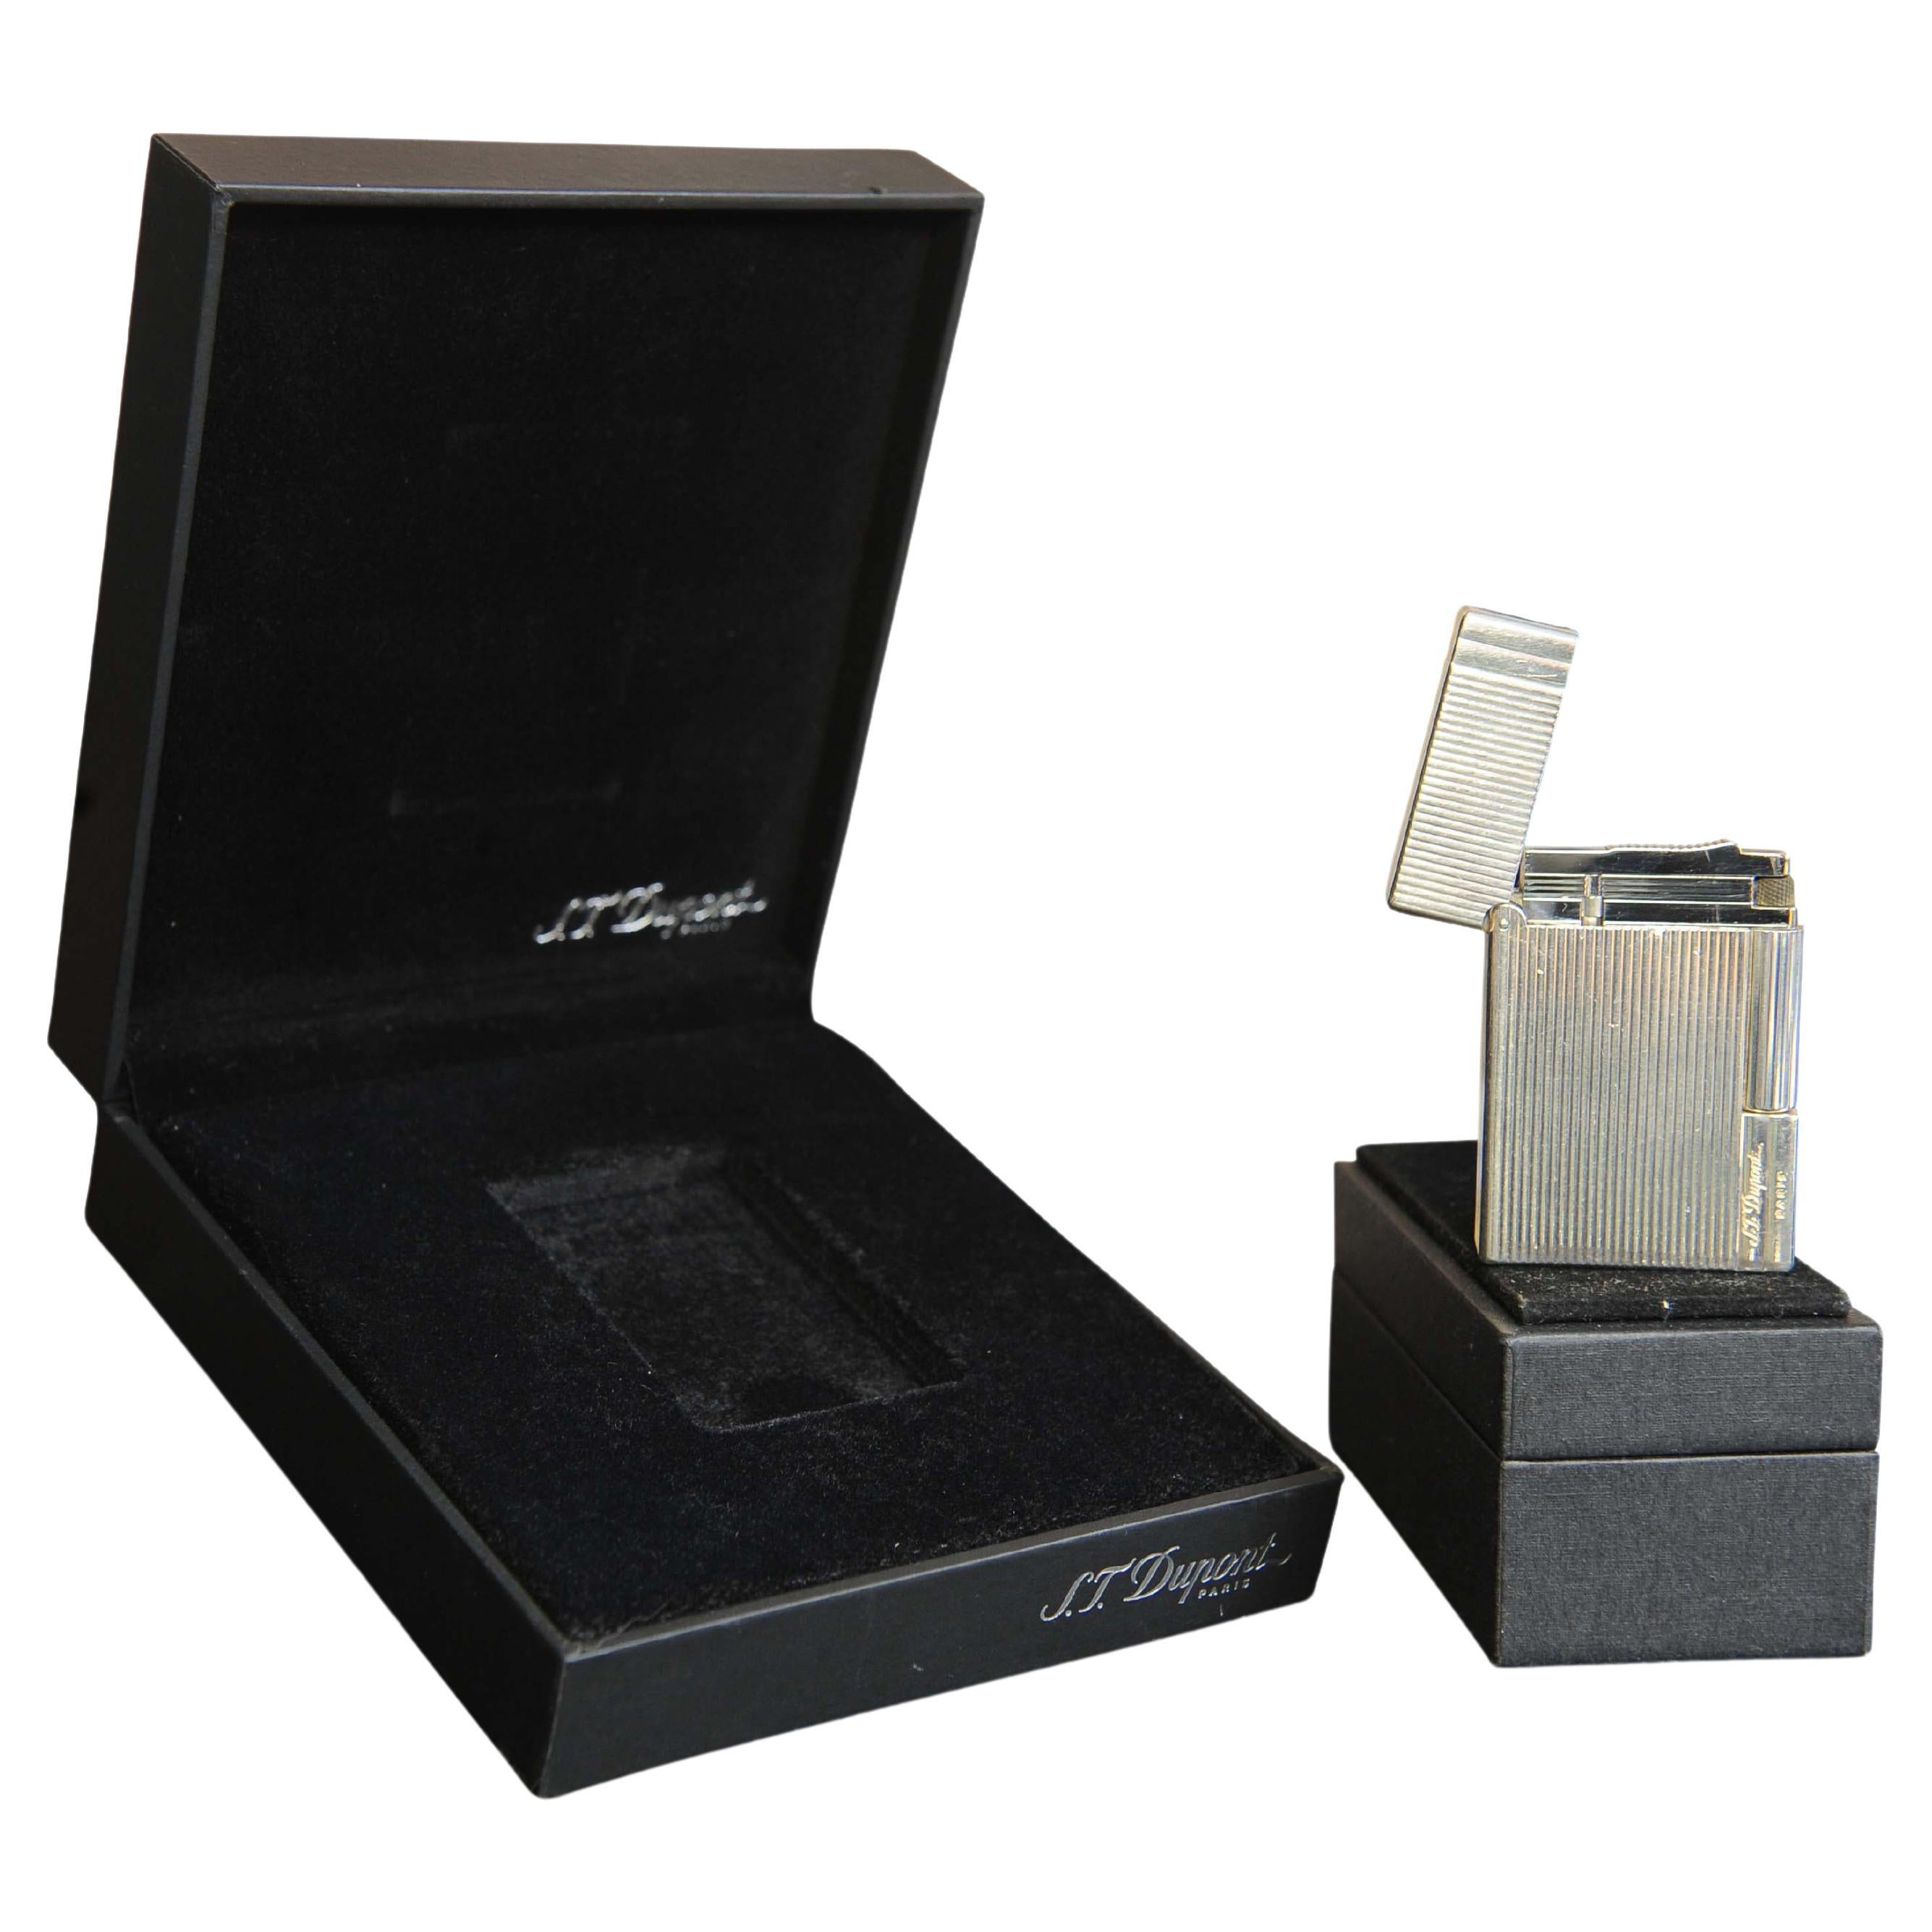 S. T. DuPont Gatsby Paris Cigarette Lighter with Original Box and Papers

Booklet stamped at purchase 2016

Stamped 1LY8N84 DuPont PARIS, Made in France on base.

